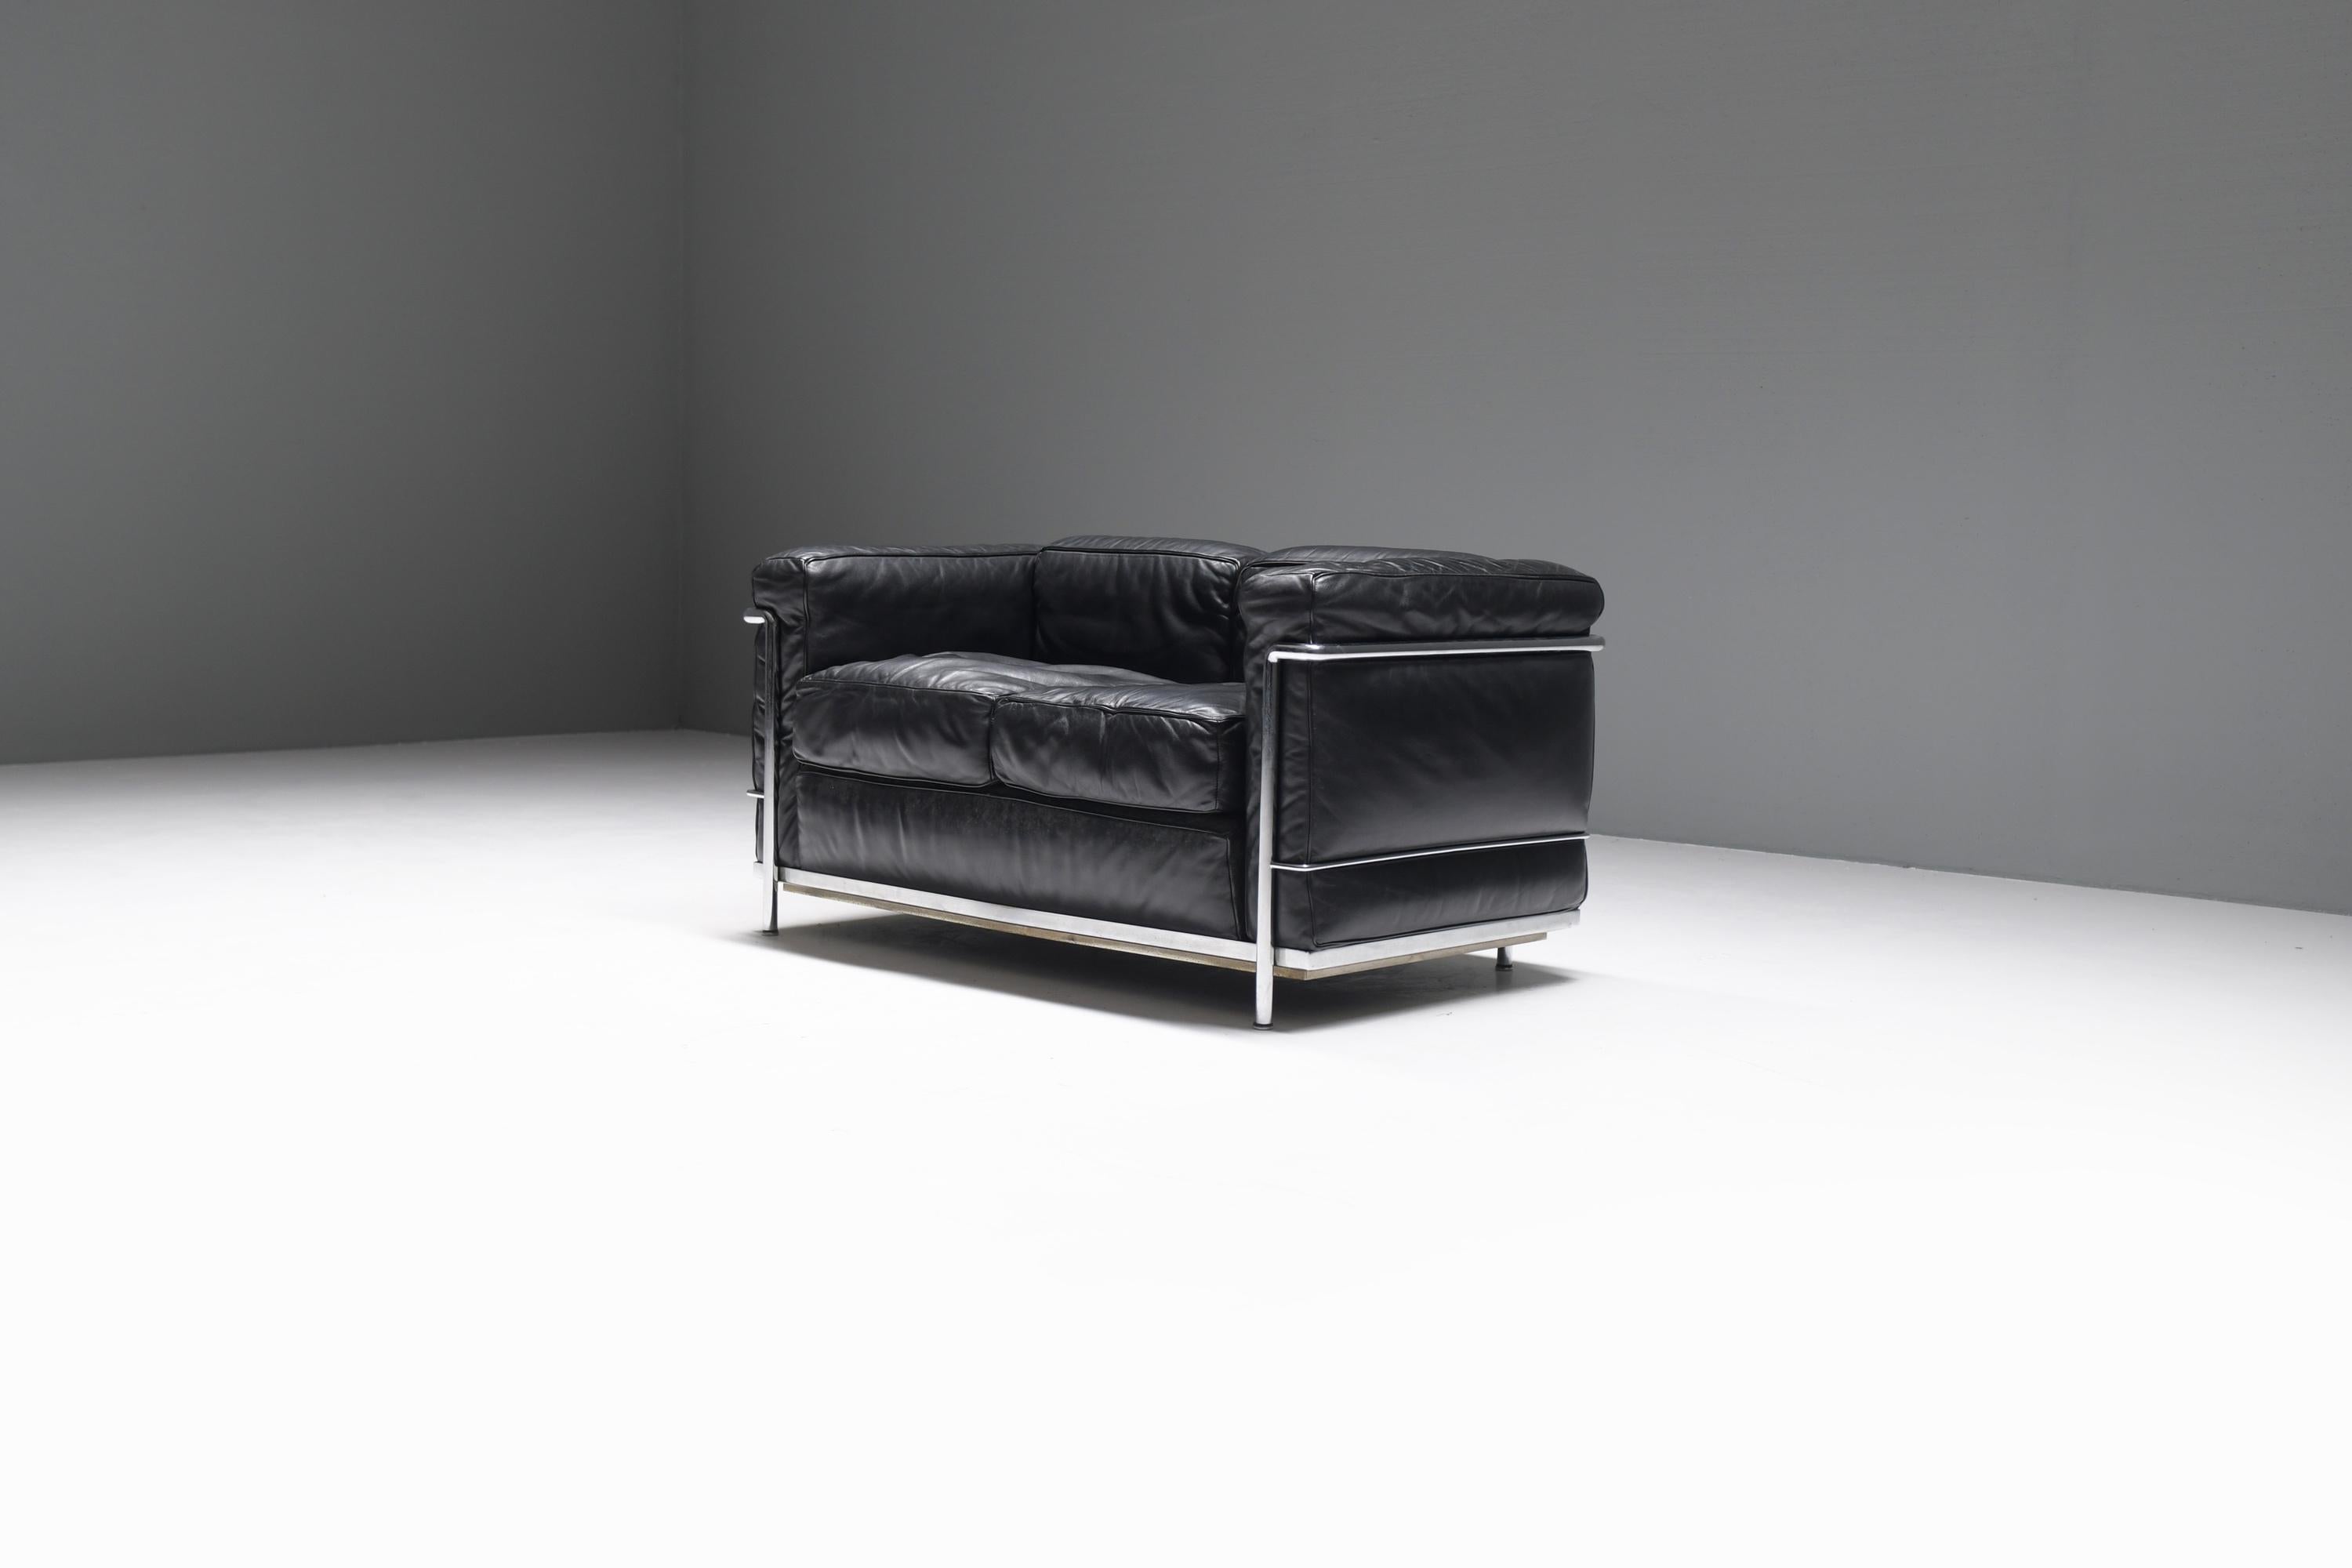 20th Century LC 2 set 1978 - Le Corbusier, Pierre Jeanneret & Charlotte Perriand - Cassina For Sale